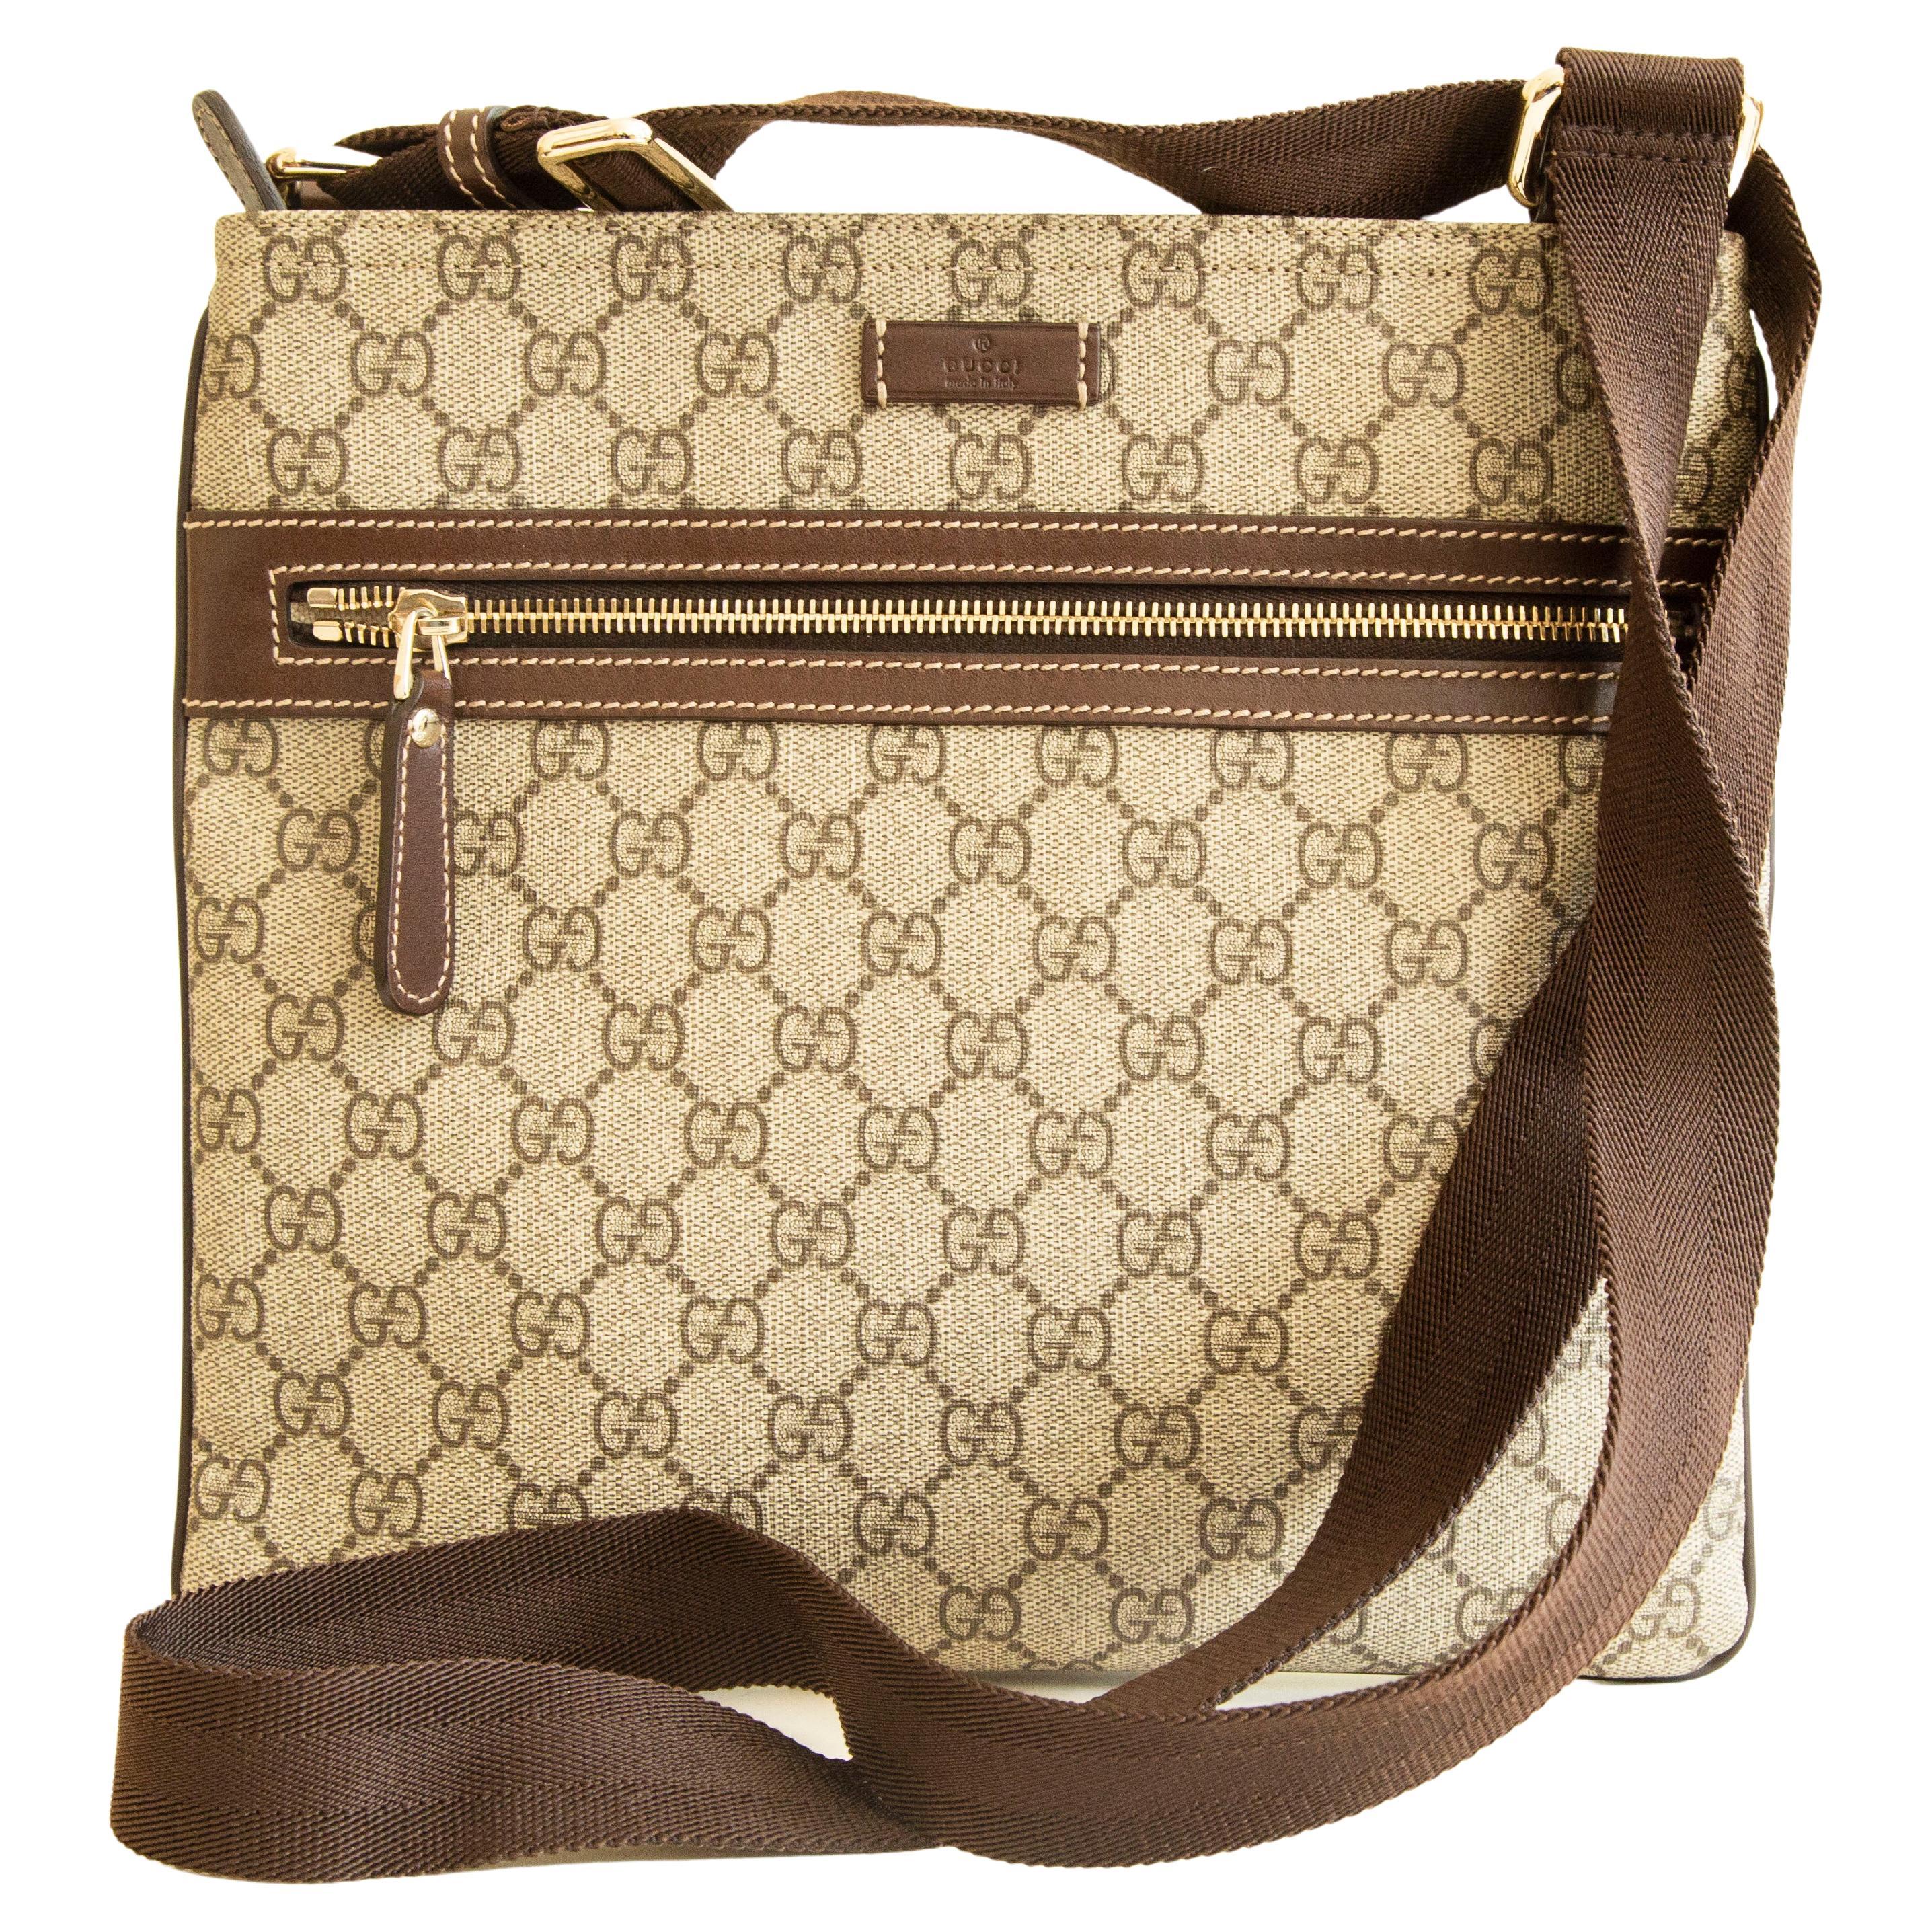 Gucci GG Supreme Messenger Bag in Coated Canvas and Brown Finish